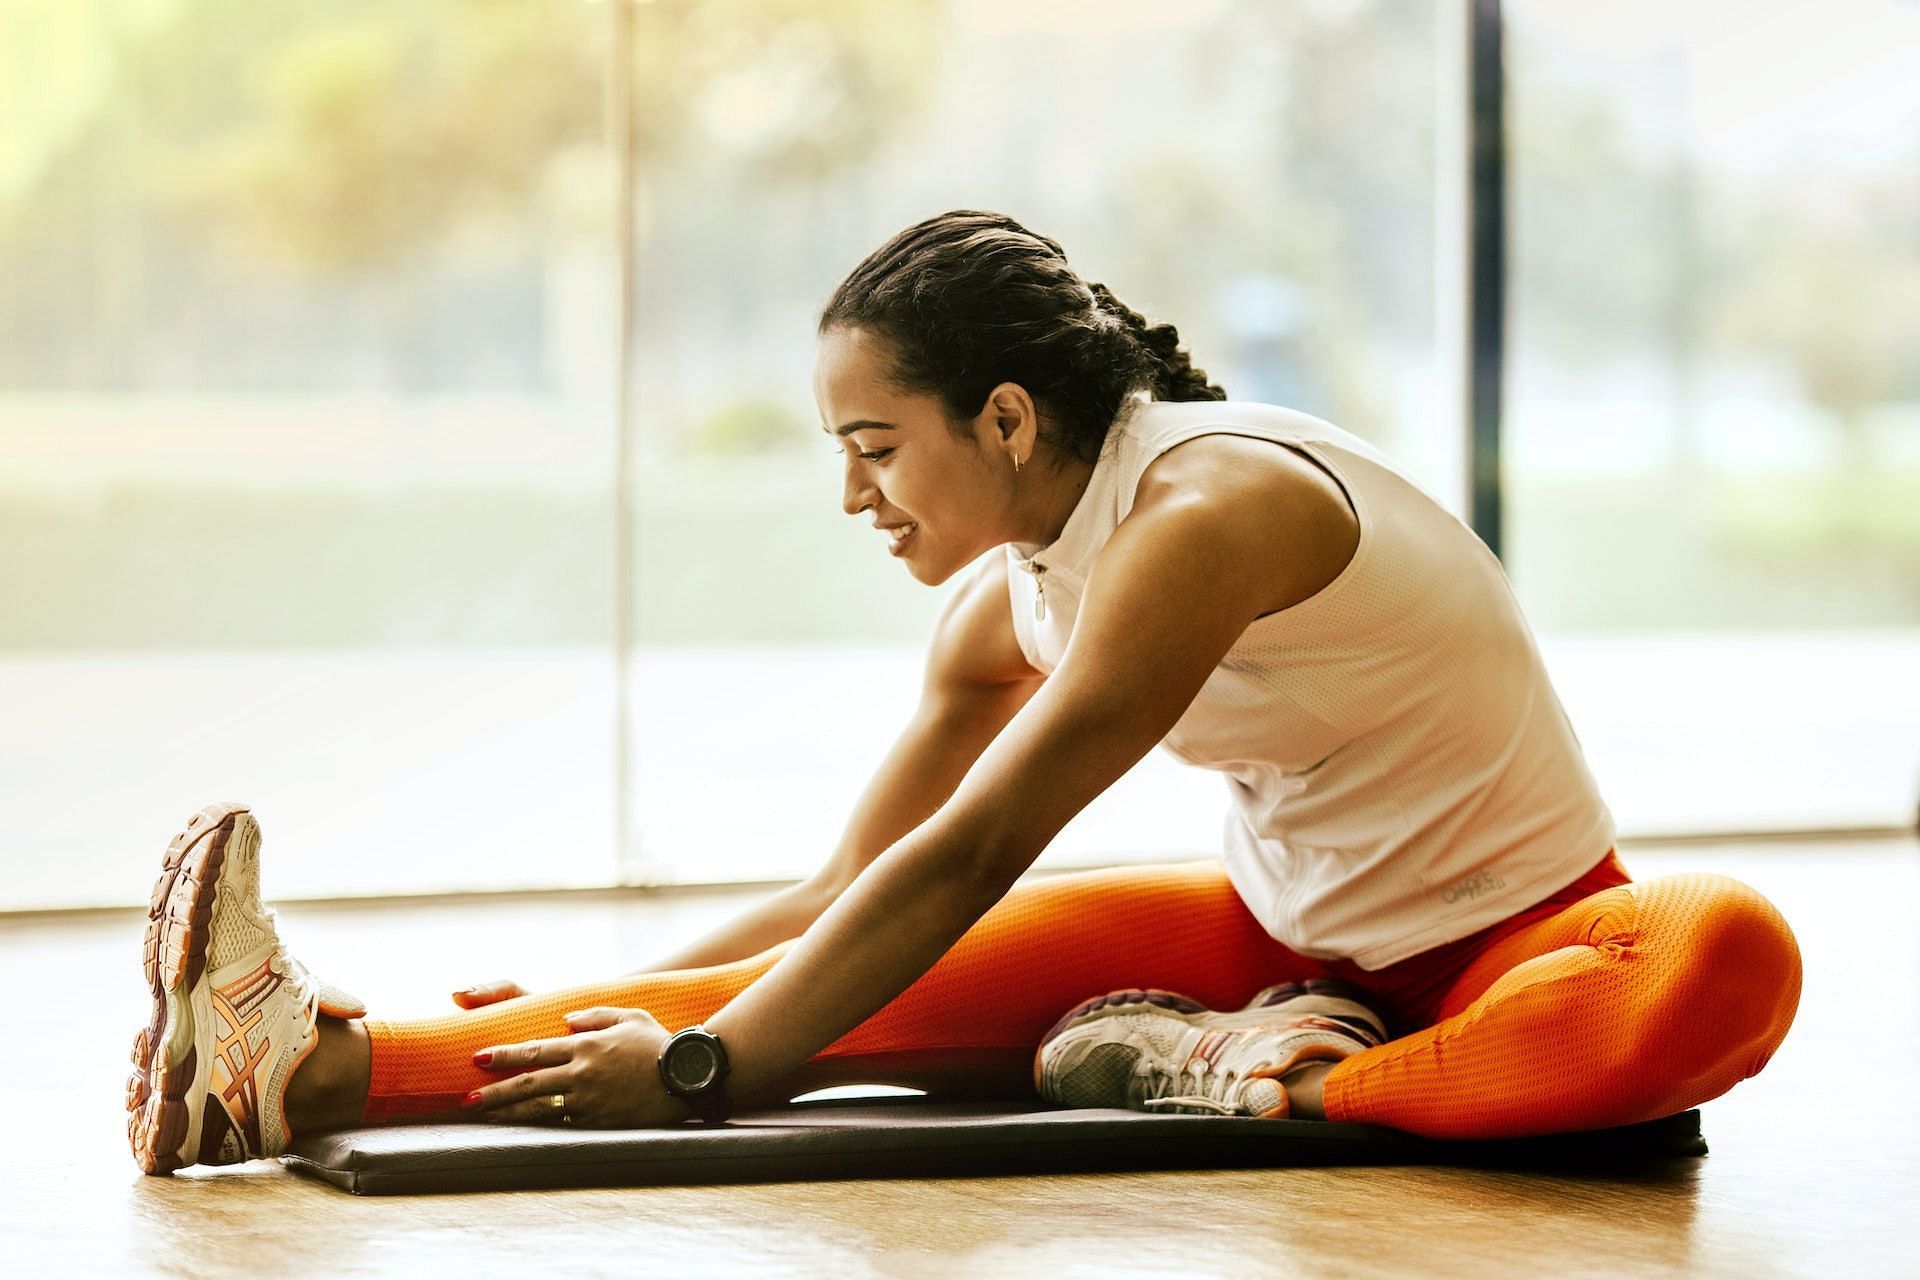 Warming-up exercises prevent injuries and muscle soreness. (Photo via Pexels/Jonathan Borba)